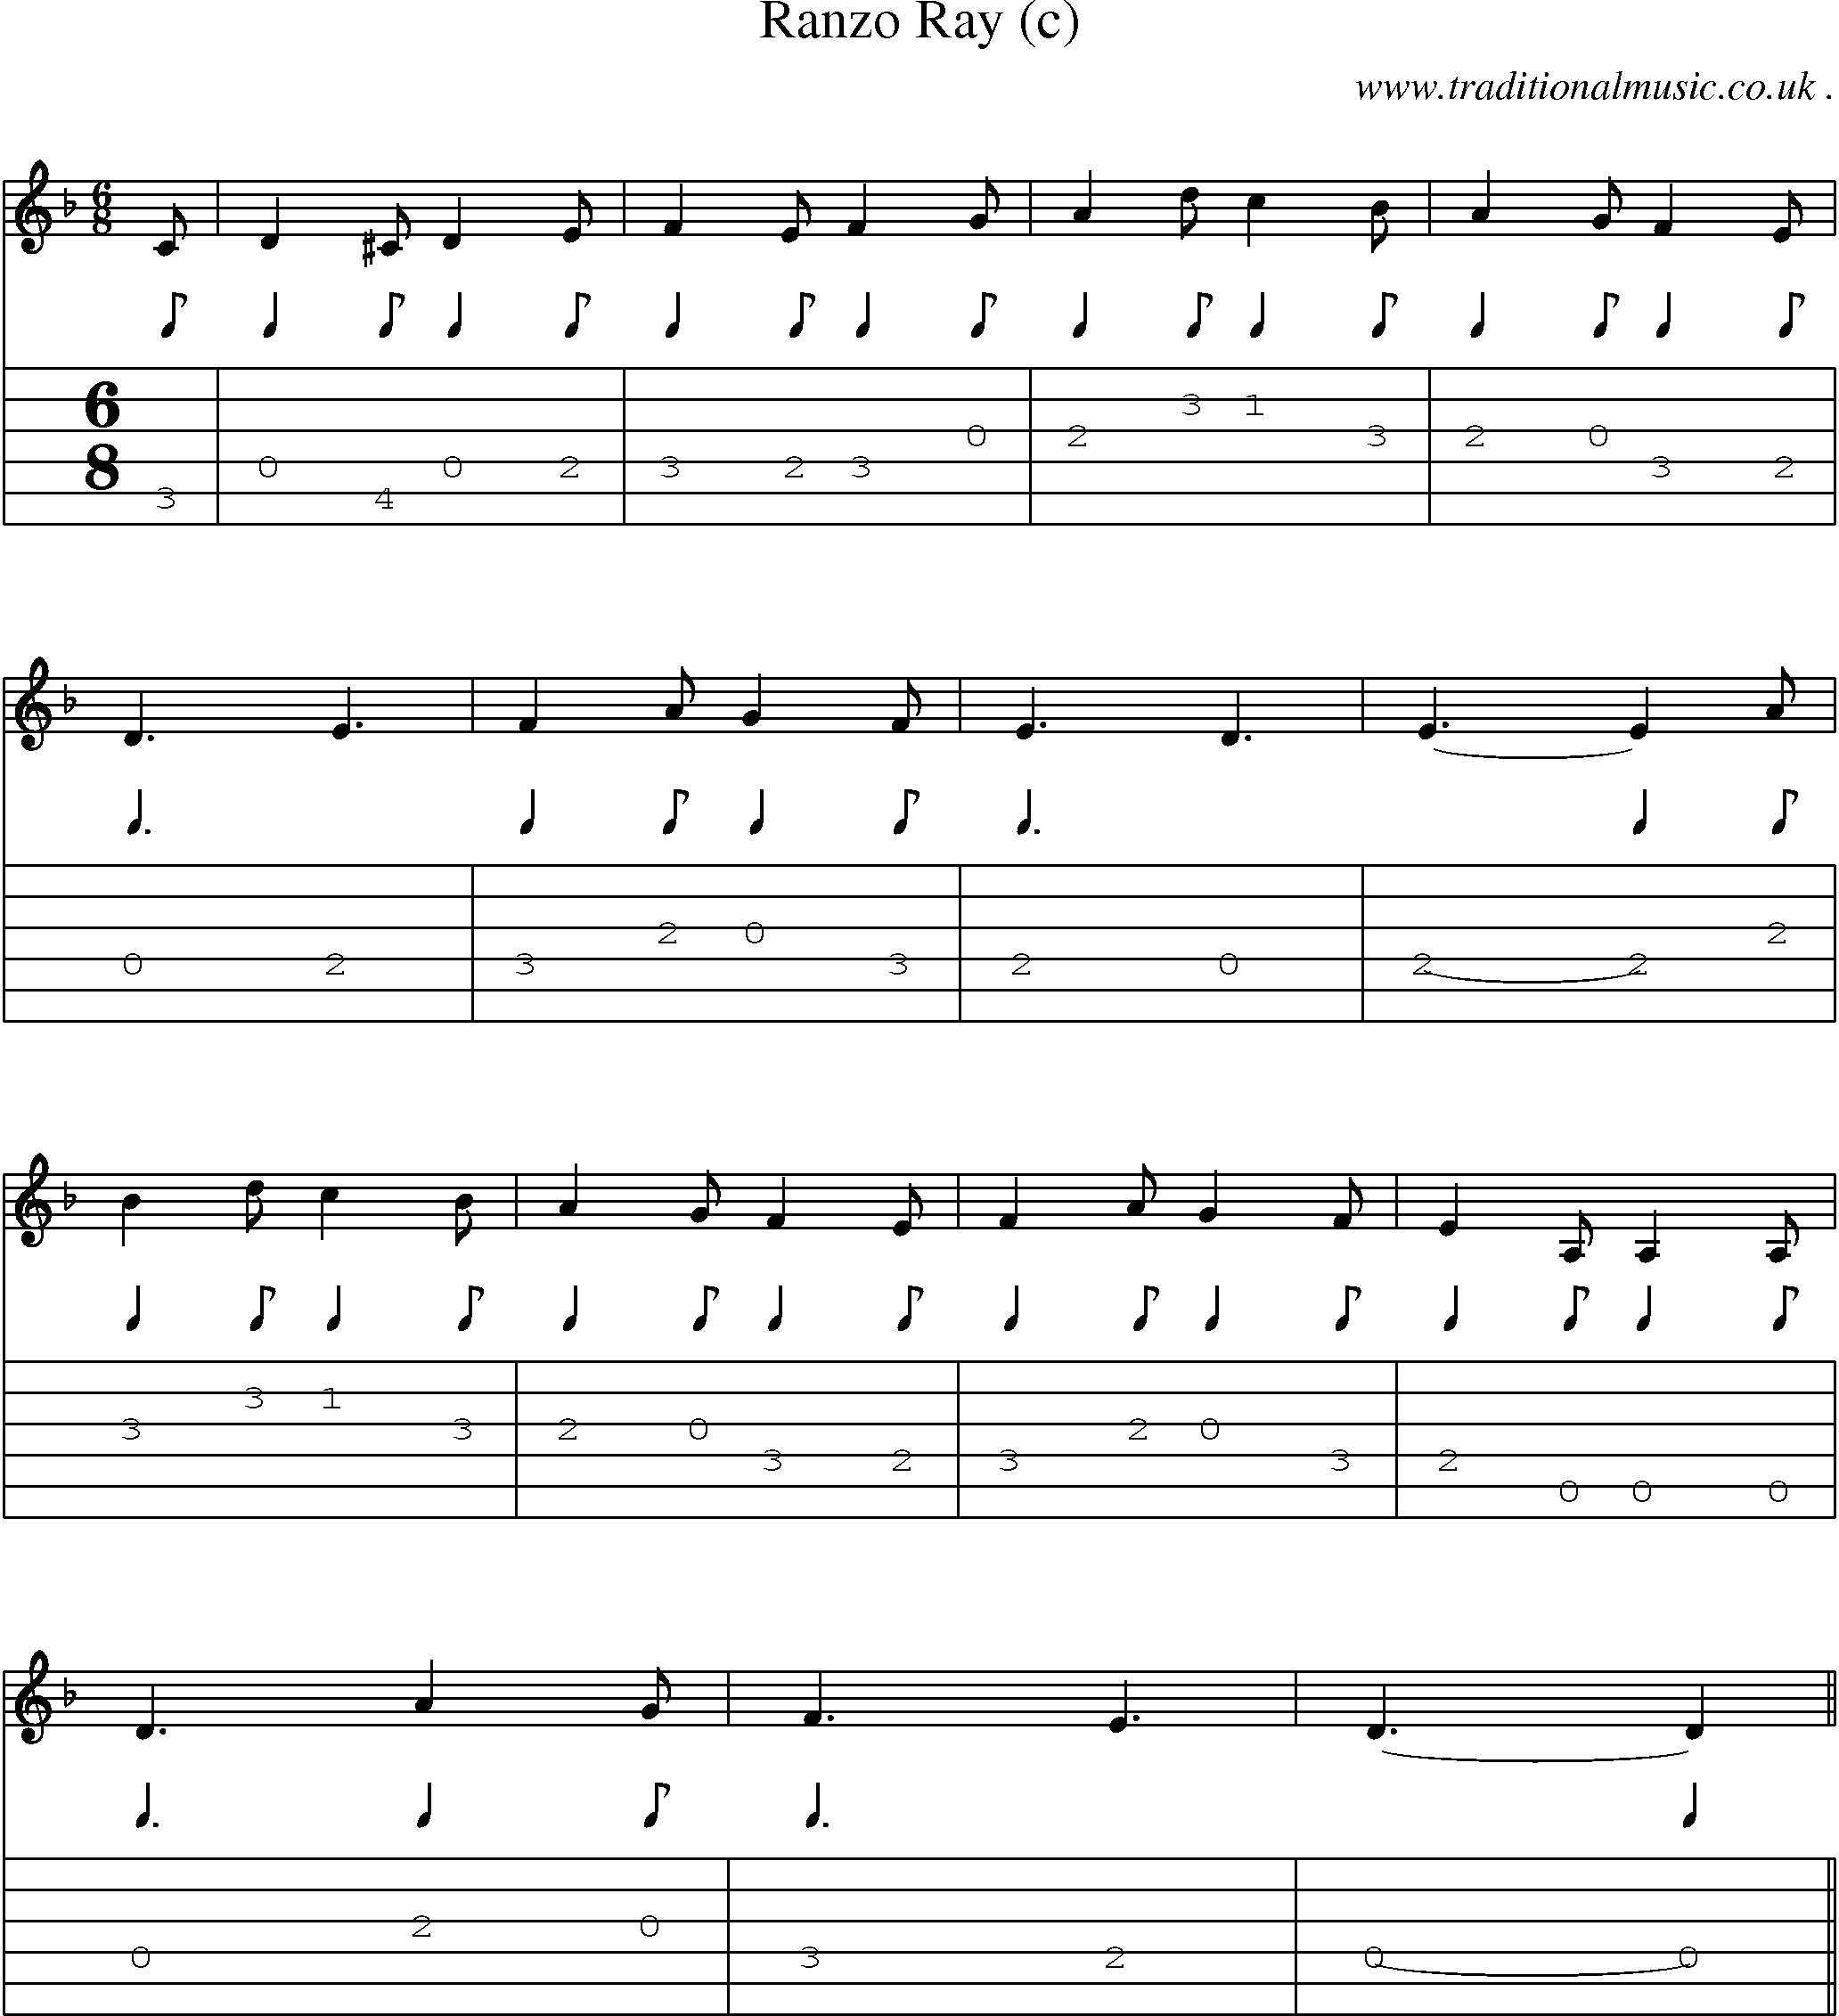 Sheet-Music and Guitar Tabs for Ranzo Ray (c)